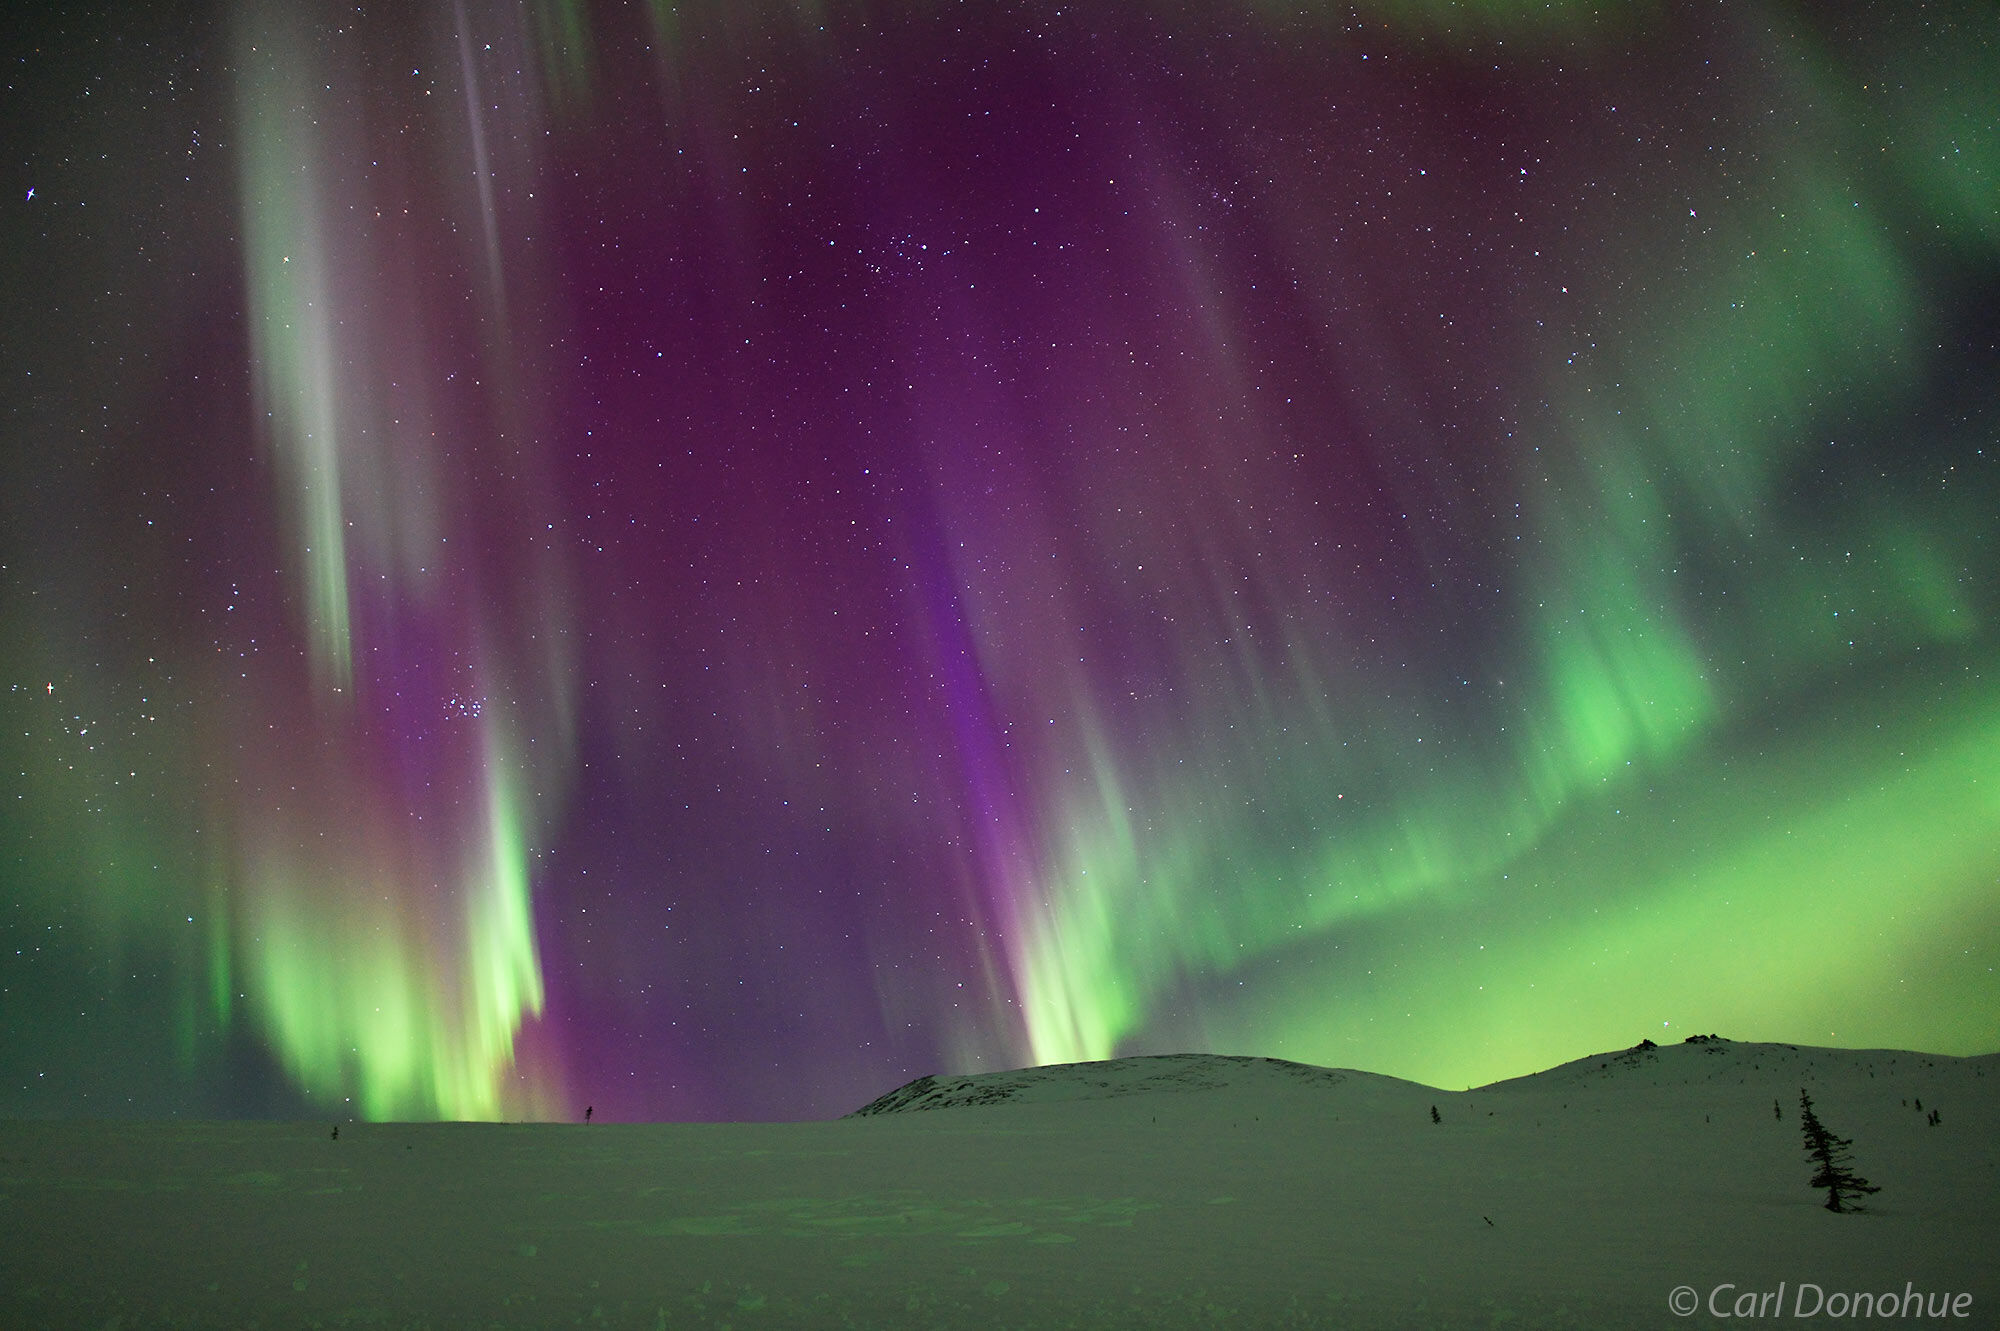 Purple was never so deep. Reds, greens, purples and more in this Aurora borealis photo, or northern lights, Alaska.